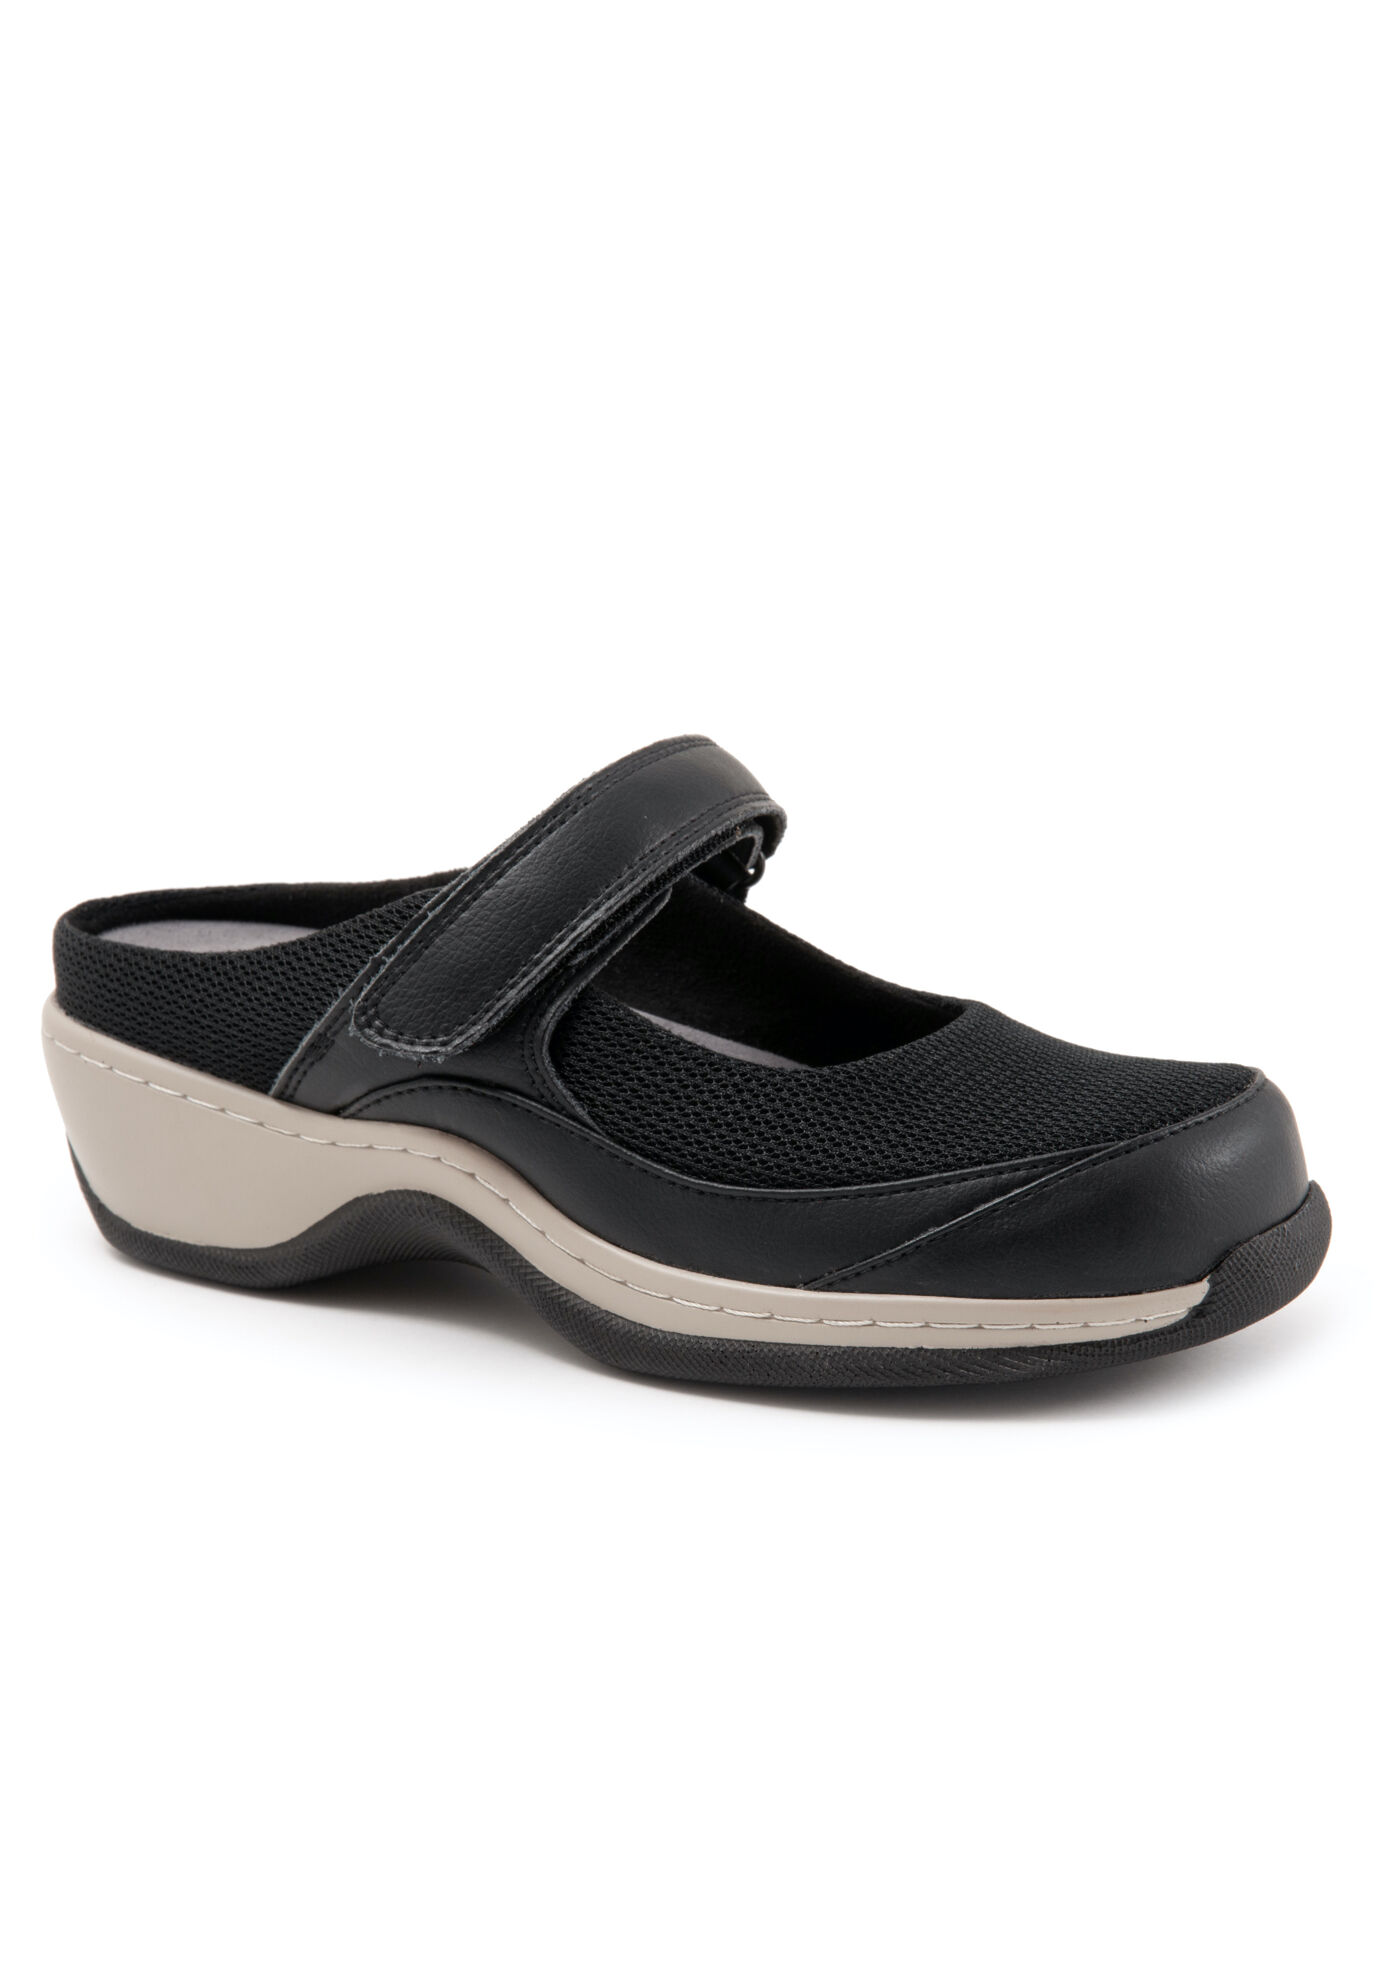 Extra Wide Width Women's Arcadia Adjustable Clog by SoftWalk in Black (Size 7 WW)